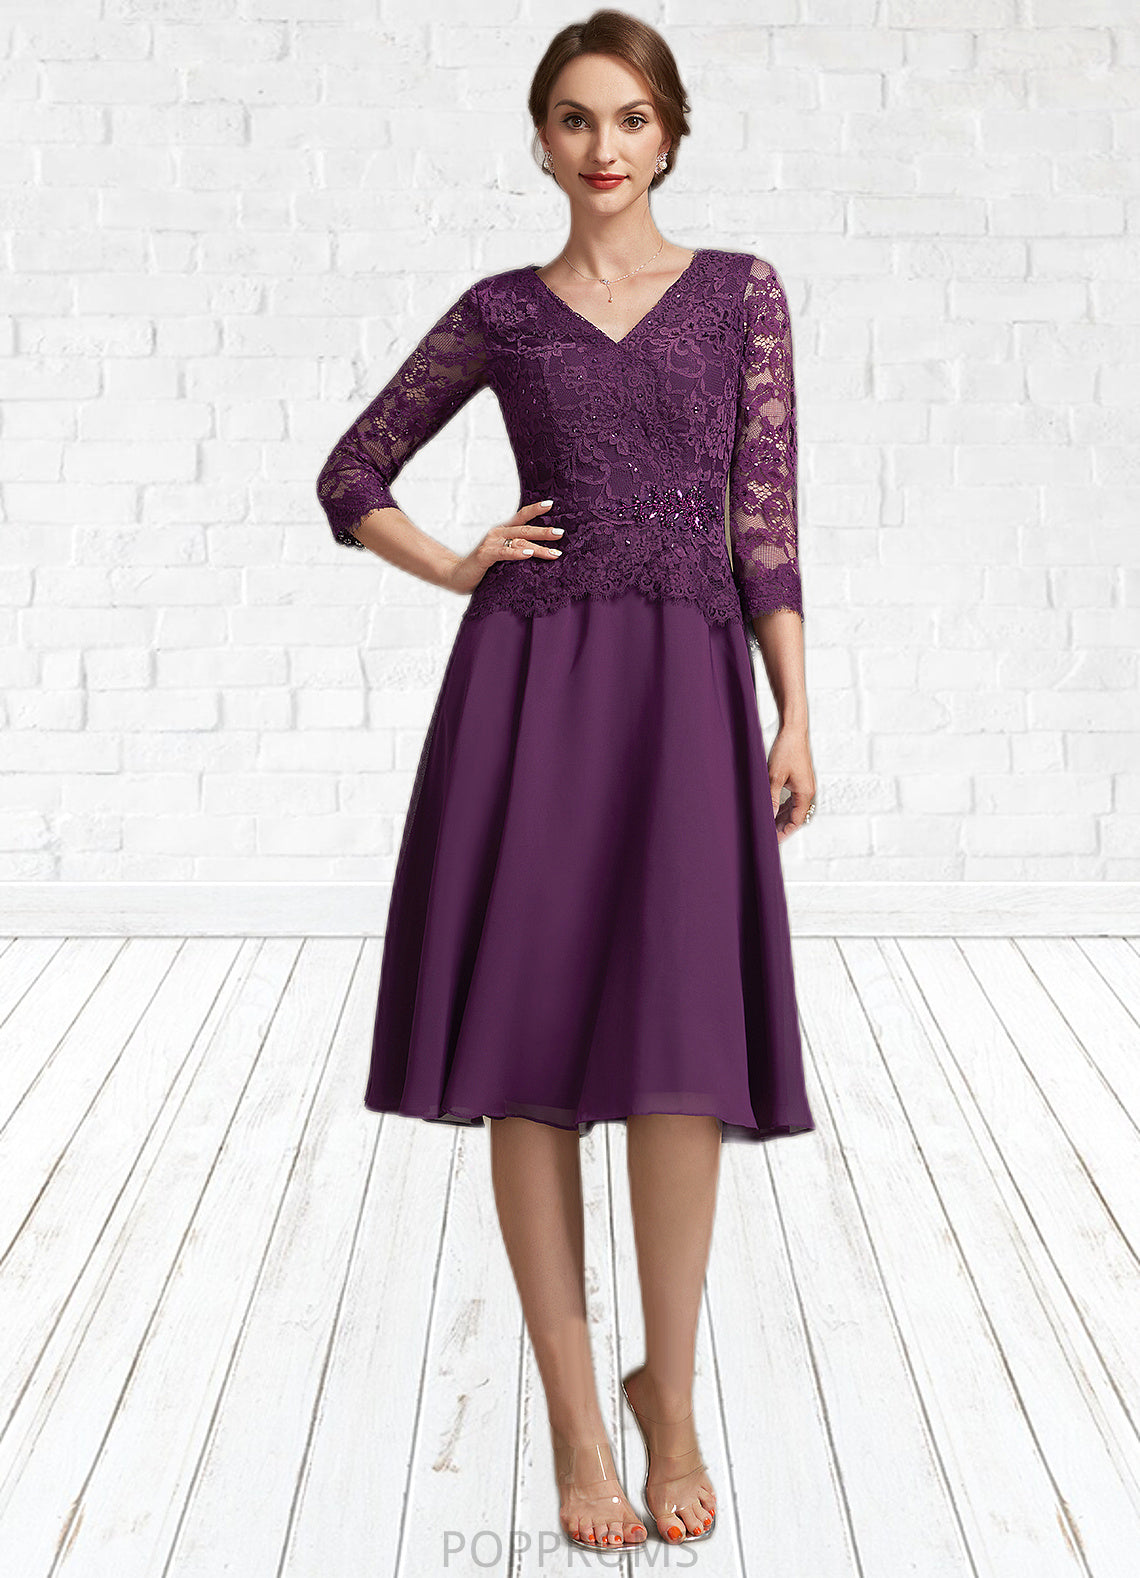 Mila A-Line V-neck Knee-Length Chiffon Lace Mother of the Bride Dress With Beading Sequins PP6126P0015035